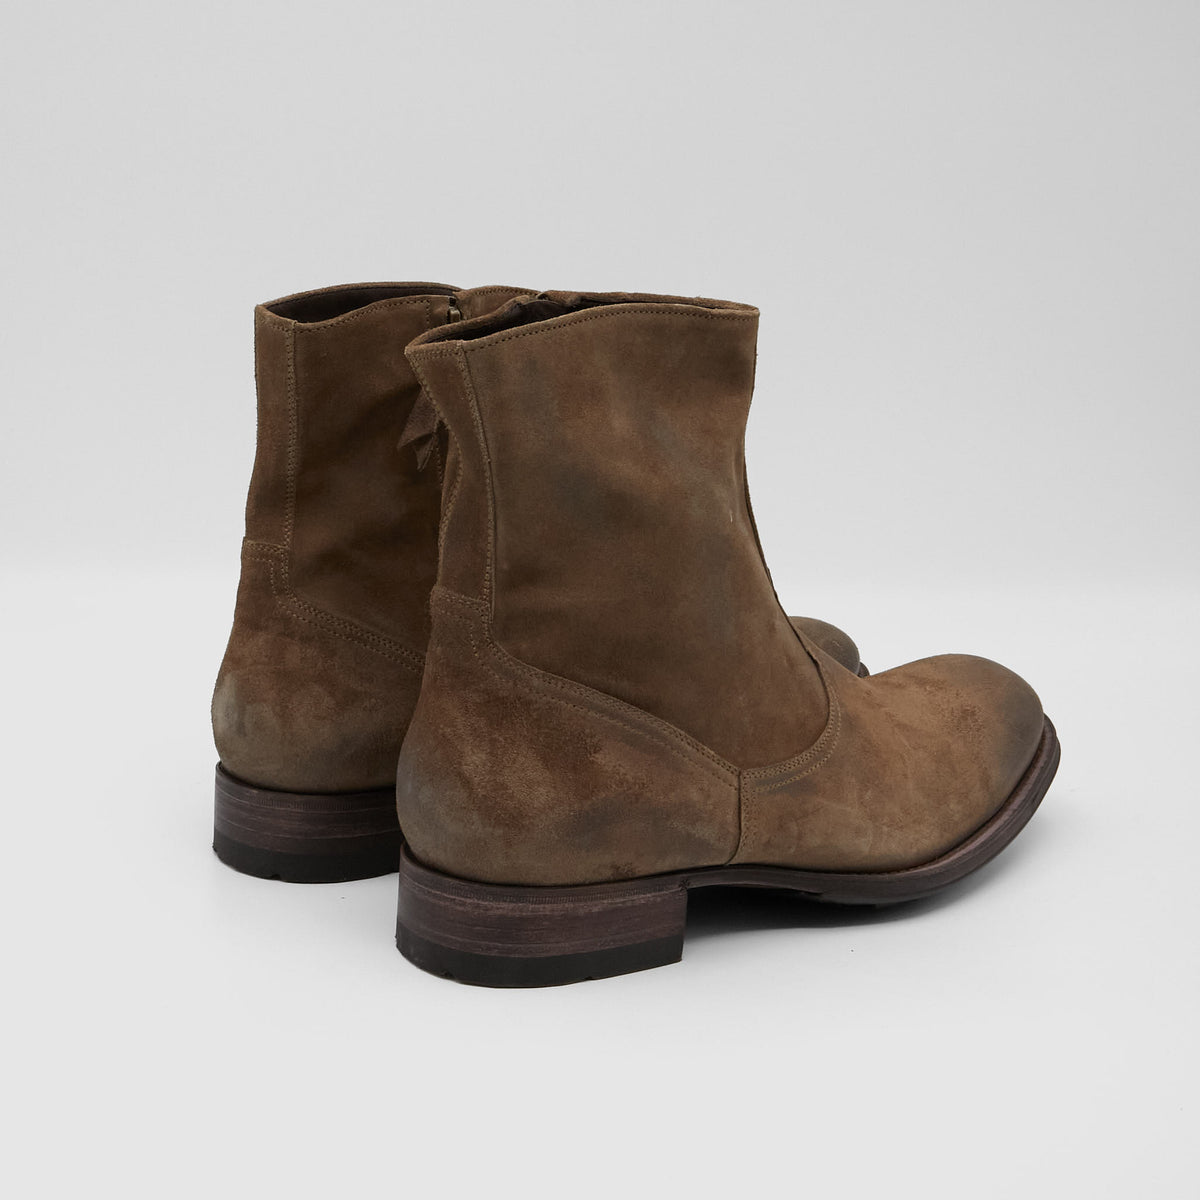 n.d.c. Christophe R Softy Boots